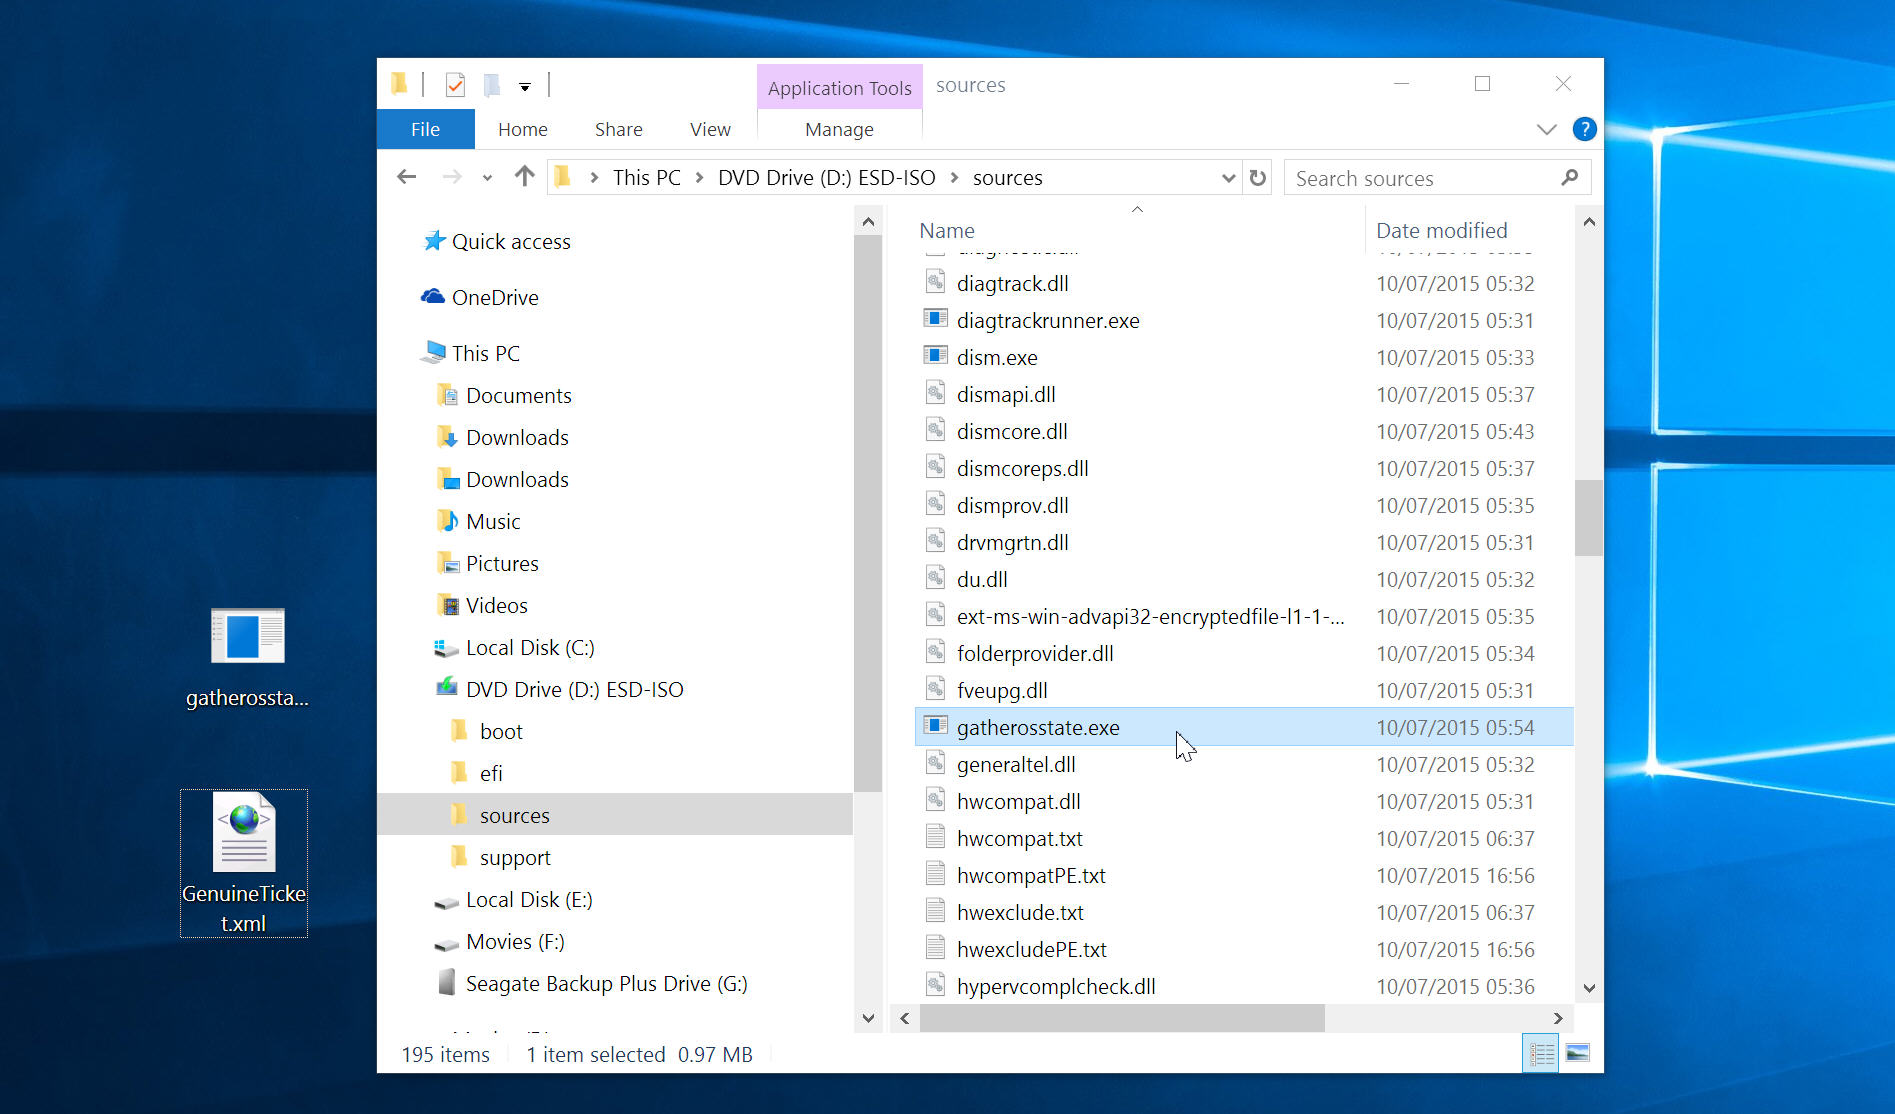 BetaNews: How to do a clean install of Windows 10 the easy way -- no